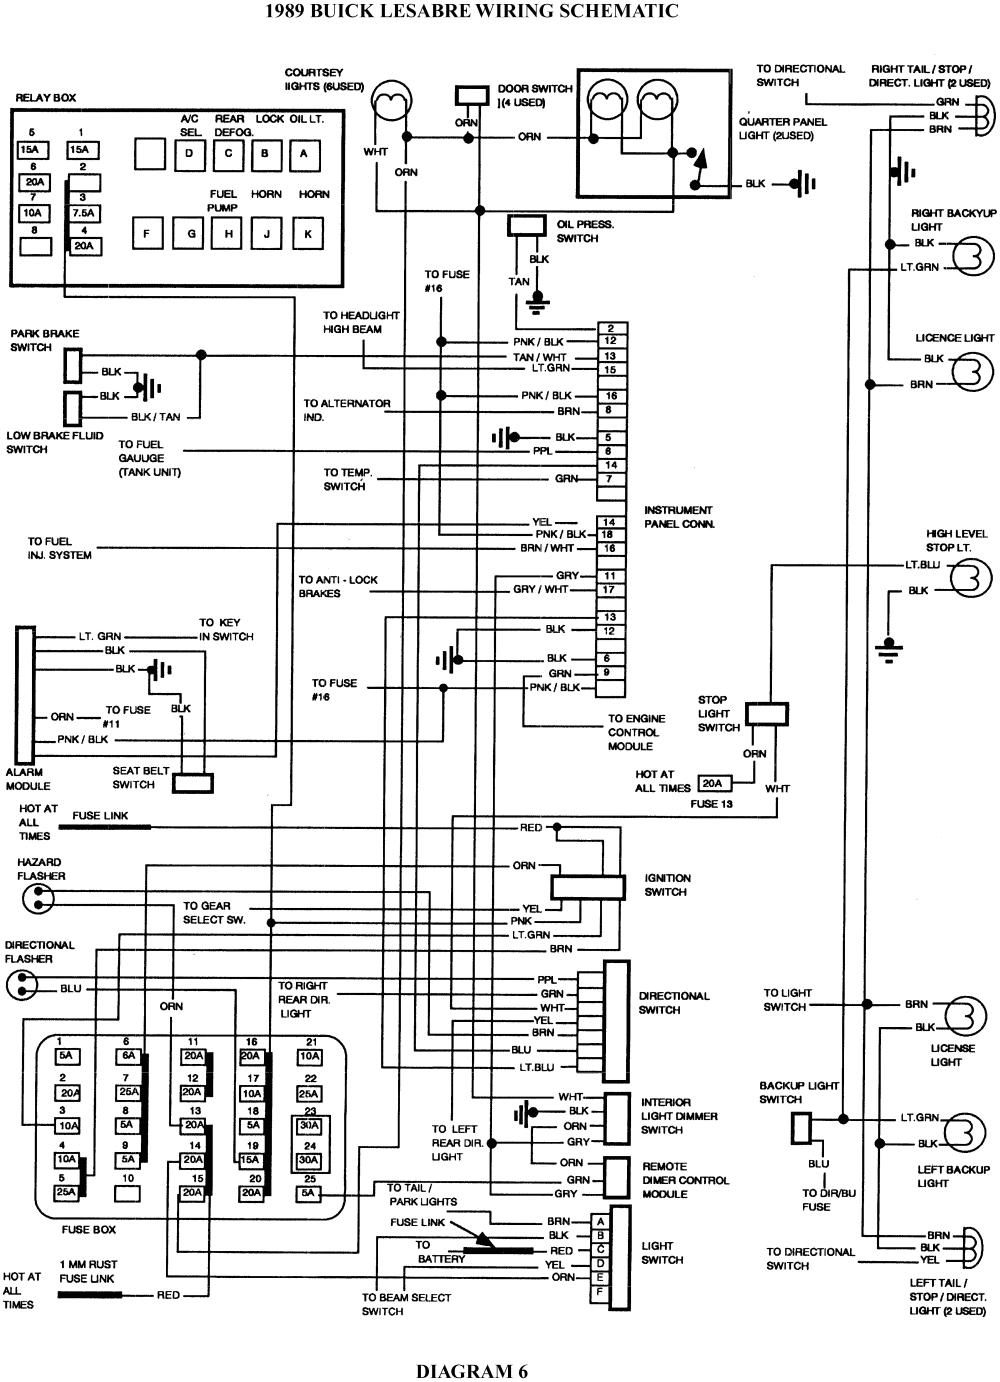 8 1989 buick lesabre wiring schematic